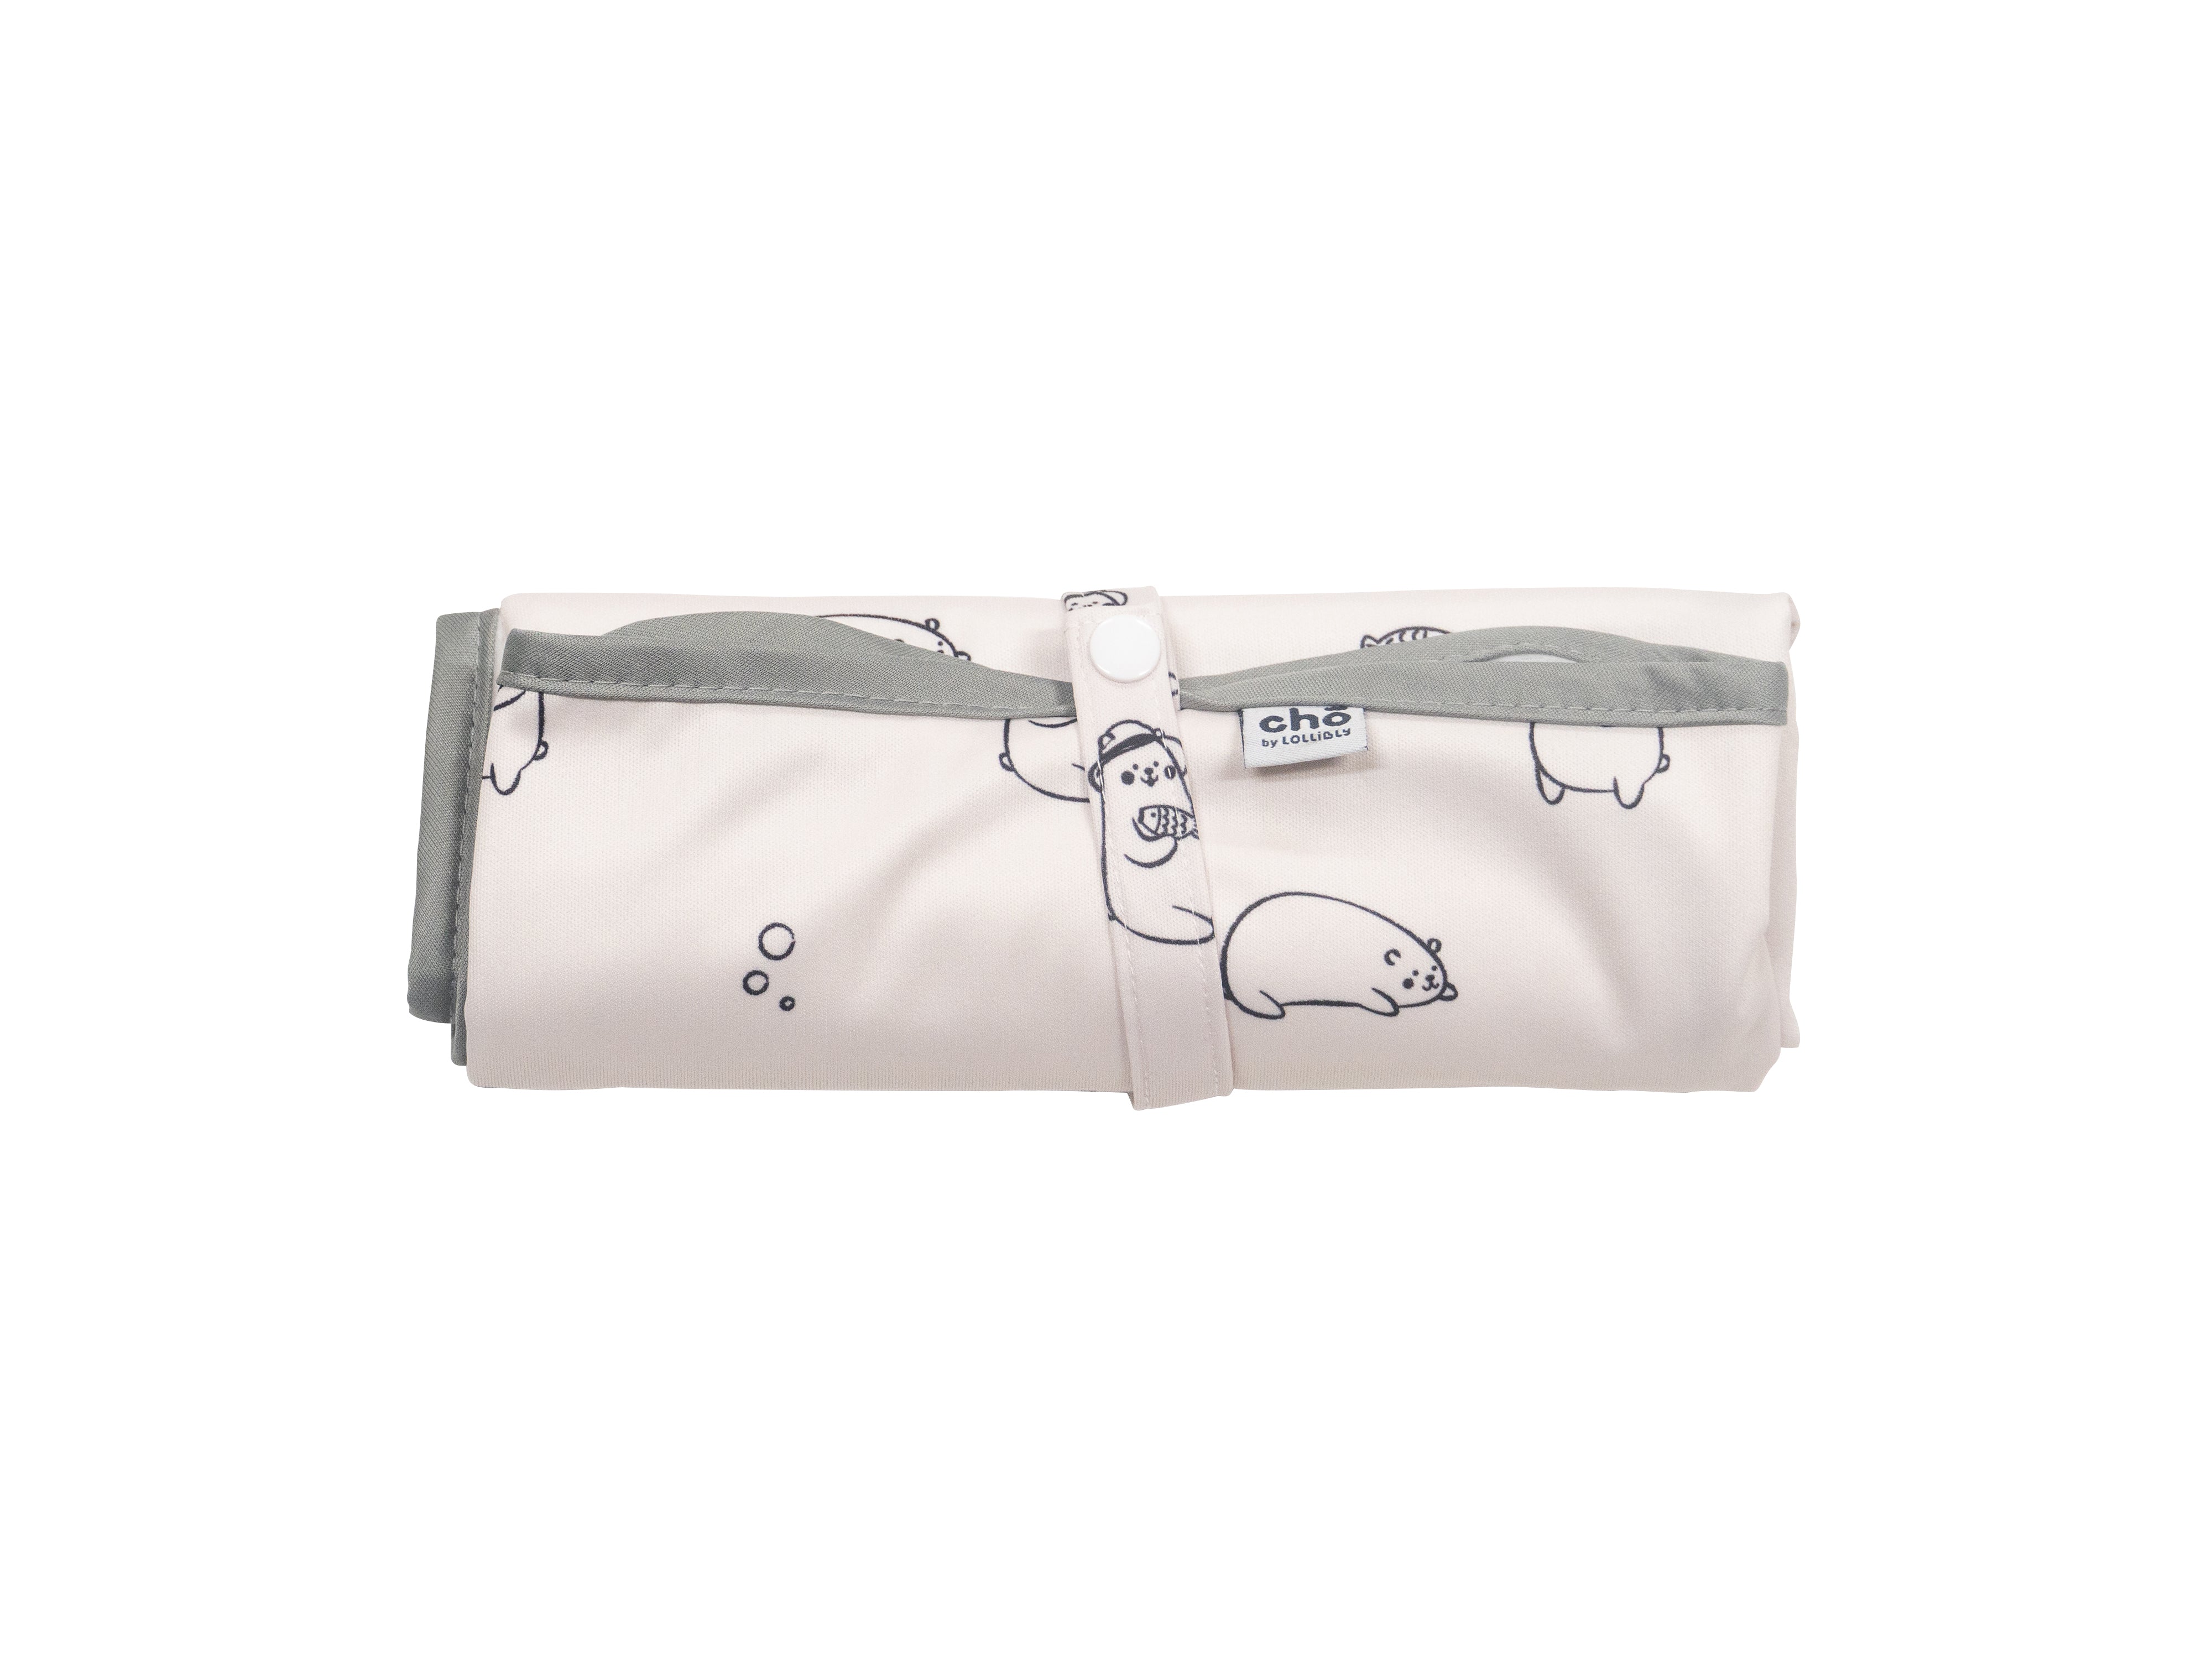 lollibly cho changing pad maru olive